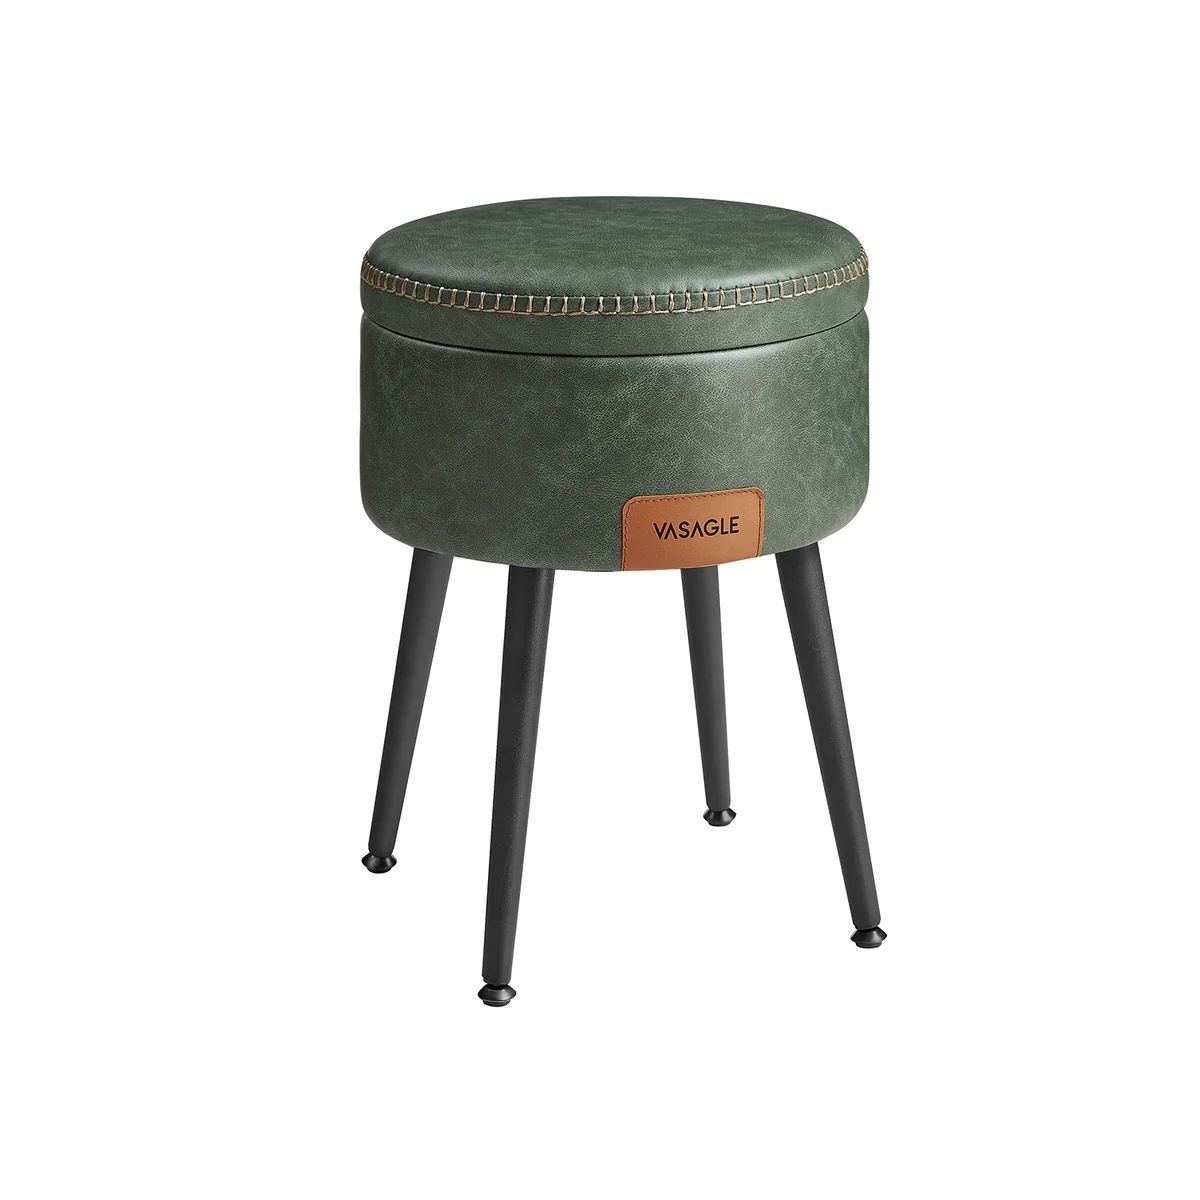 VASAGLE EKHO Collection - Round Storage Ottoman with Steel Legs, Synthetic Leather | SONGMICS